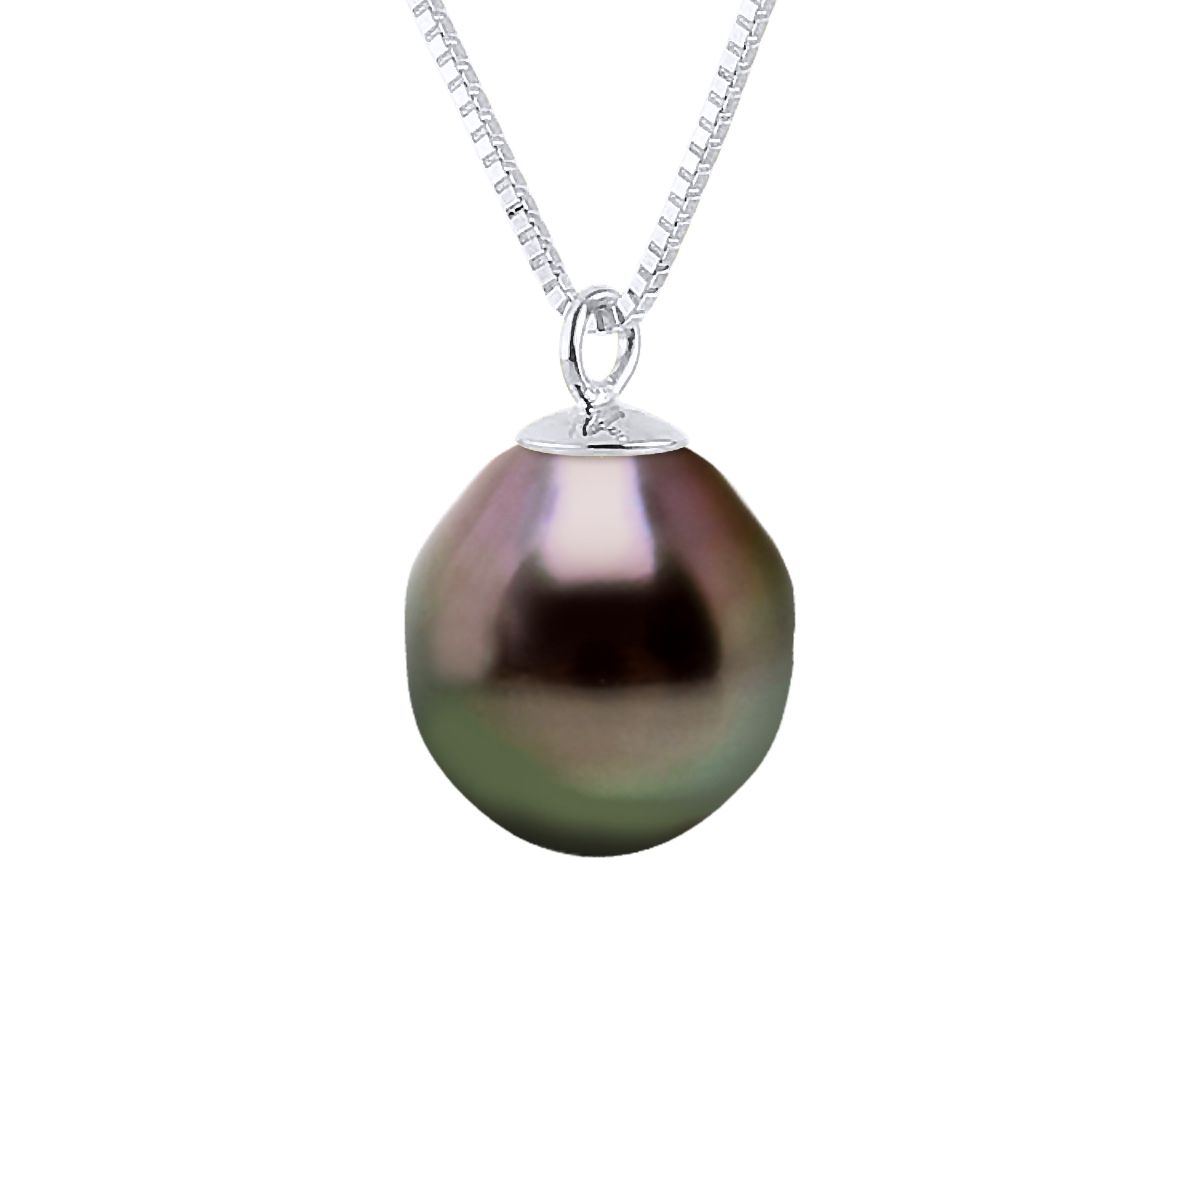 Necklace Venitian Style chain 925 Sterling Silver Rhodium-plated and true Cultured Tahitian Pearl Pear Shape 9-10 mm Length 42 cm , 16,5 in - Our jewellery is made in France and will be delivered in a gift box accompanied by a Certificate of Authenticity and International Warranty